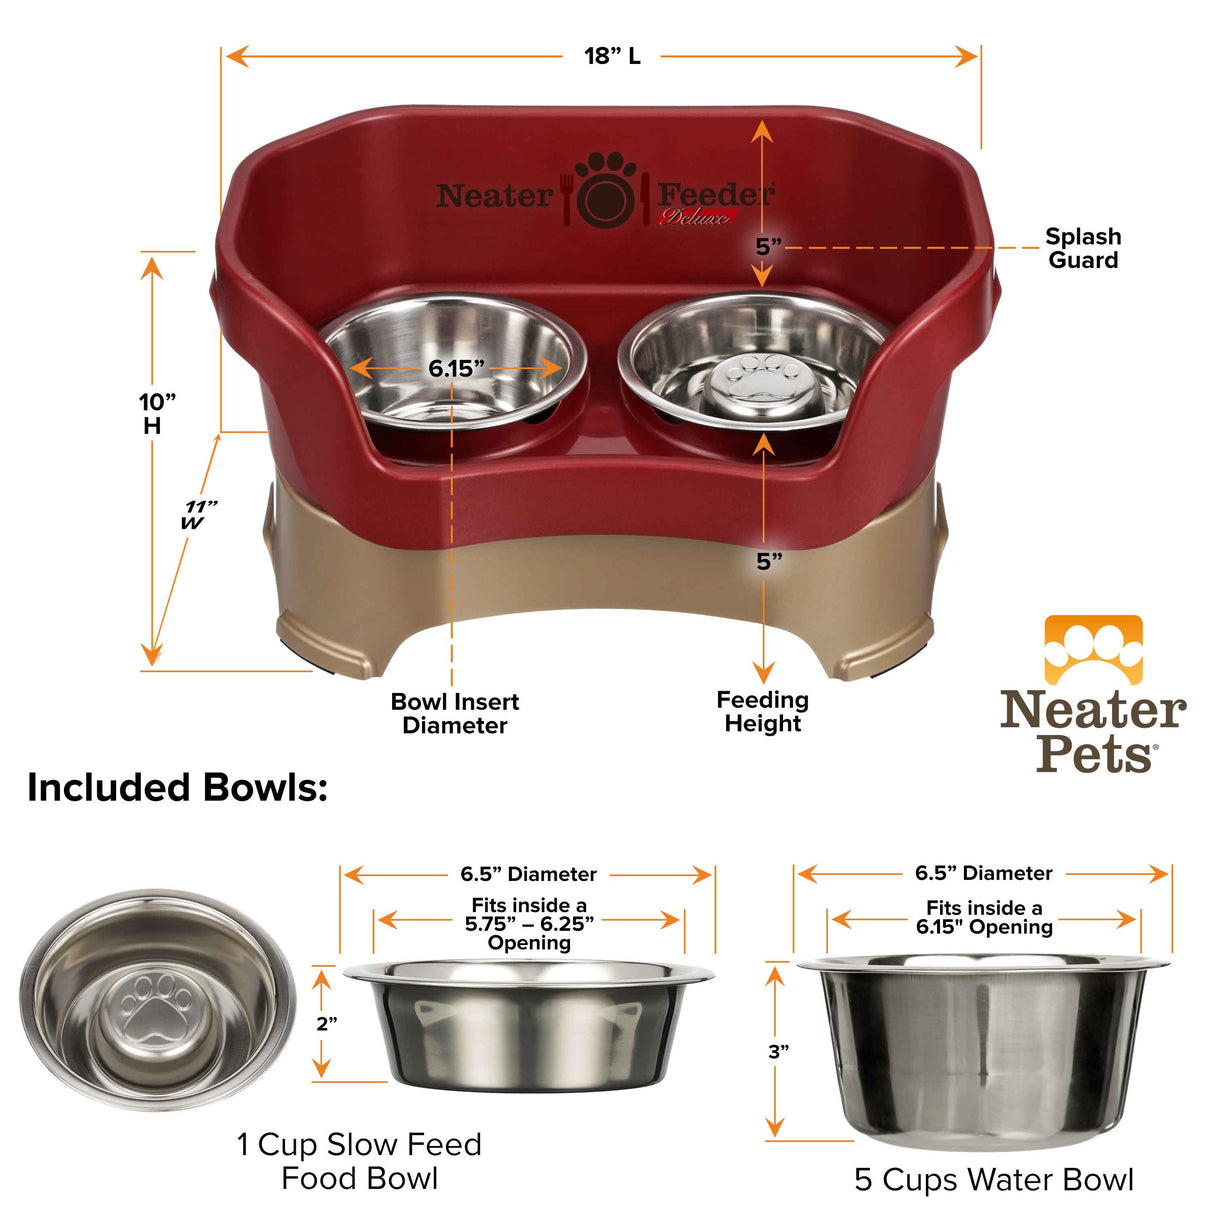 Cranberry medium DELUXE Neater Feeder with Stainless Steel Slow Feed Bowl dimensions